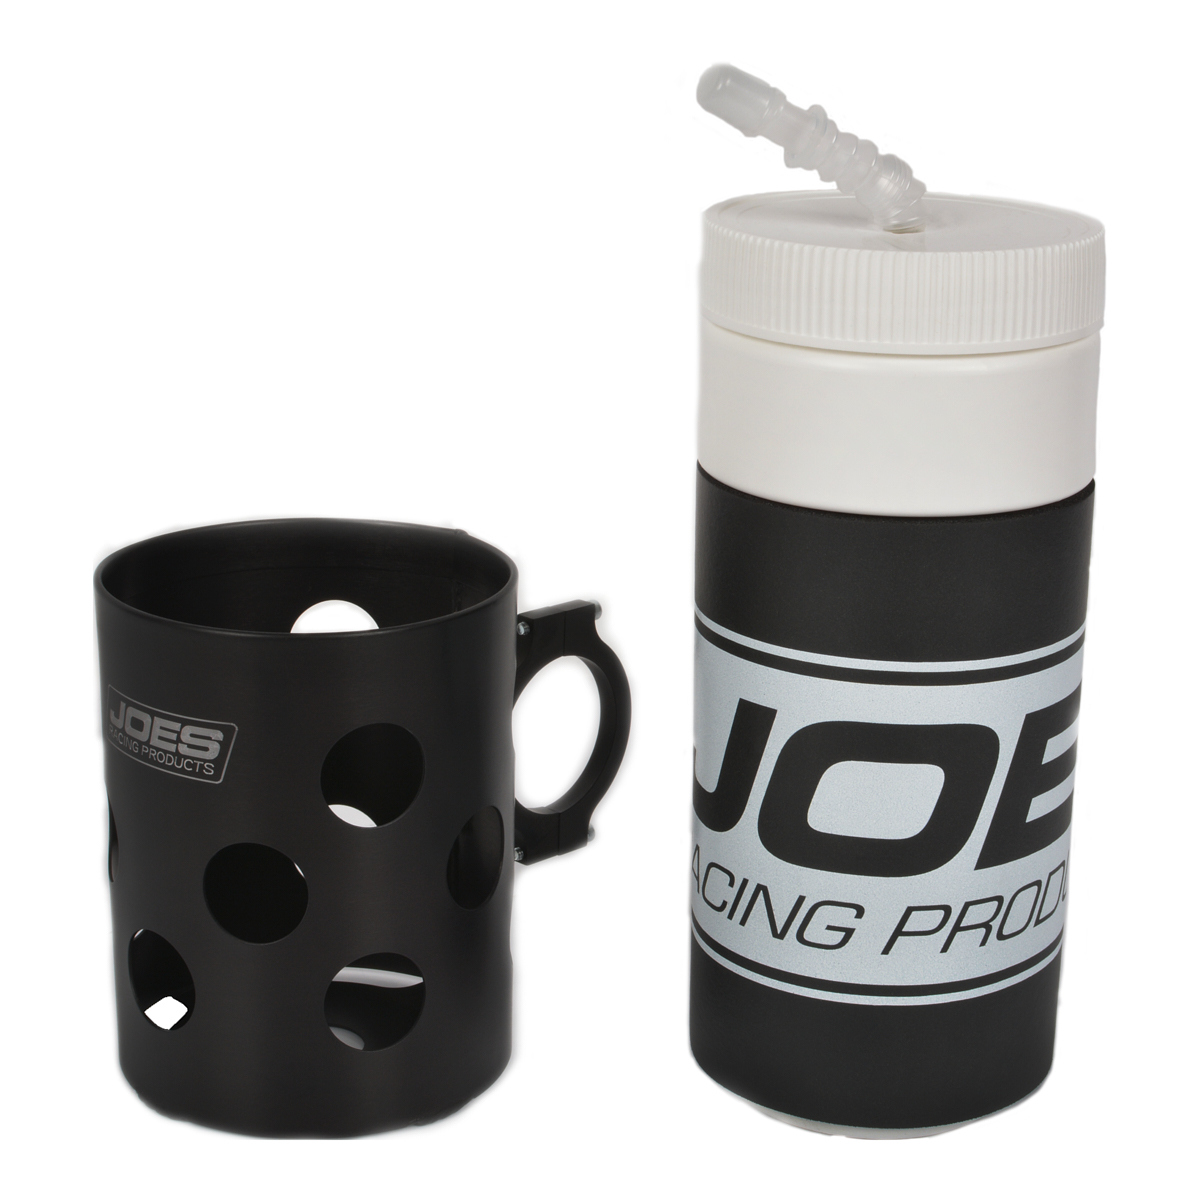 Joes Racing Products 12604-B Drink Bottle Kit, 1-3/4 in Tube, Bottle / Mount Included, Aluminum, Black Anodized, Kit